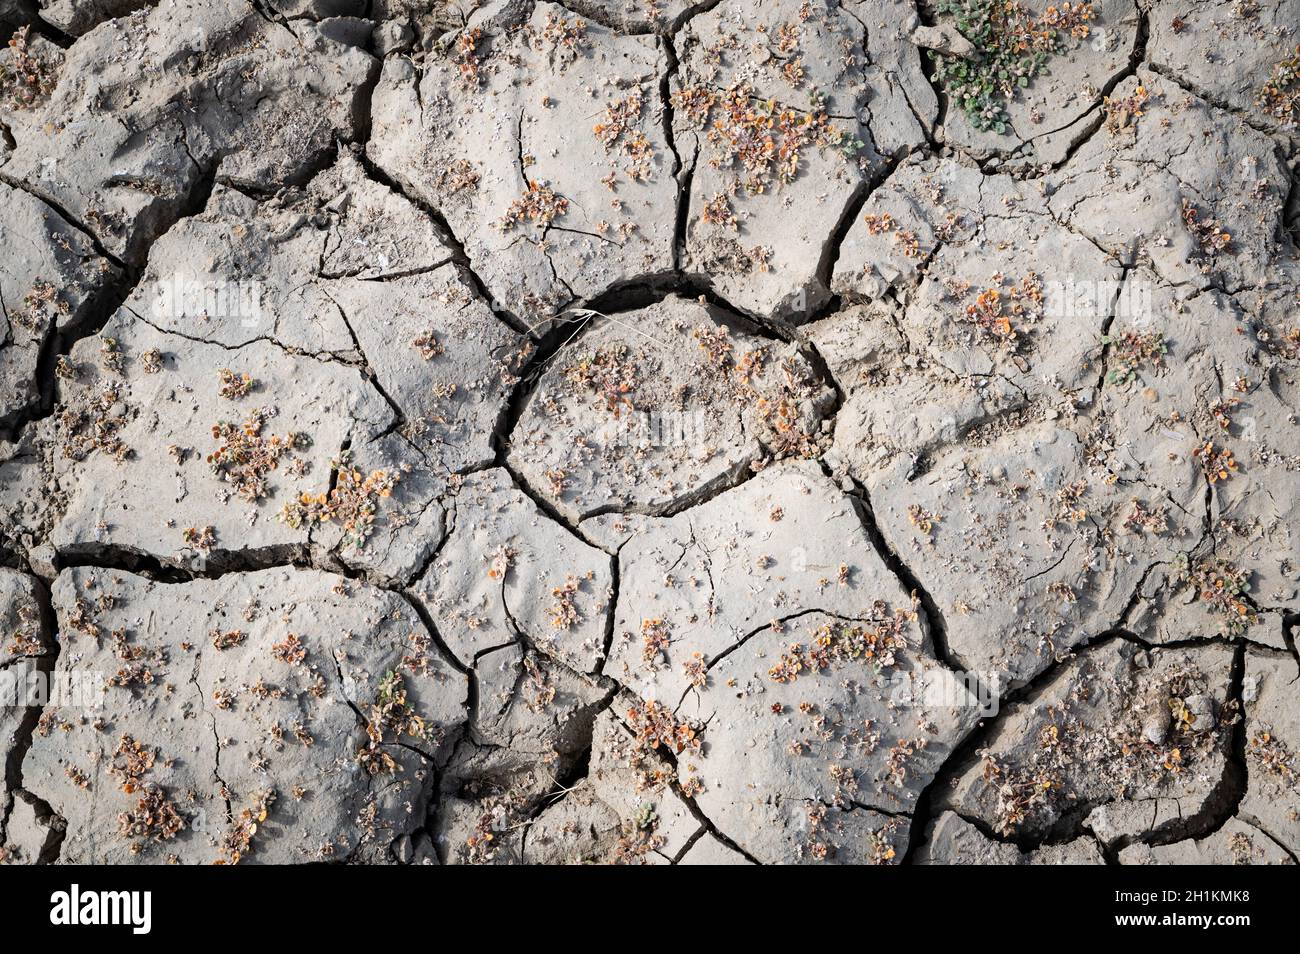 Close up photo of a section of cracked, dry mud where a marina existed prior to California's current drought. Stock Photo